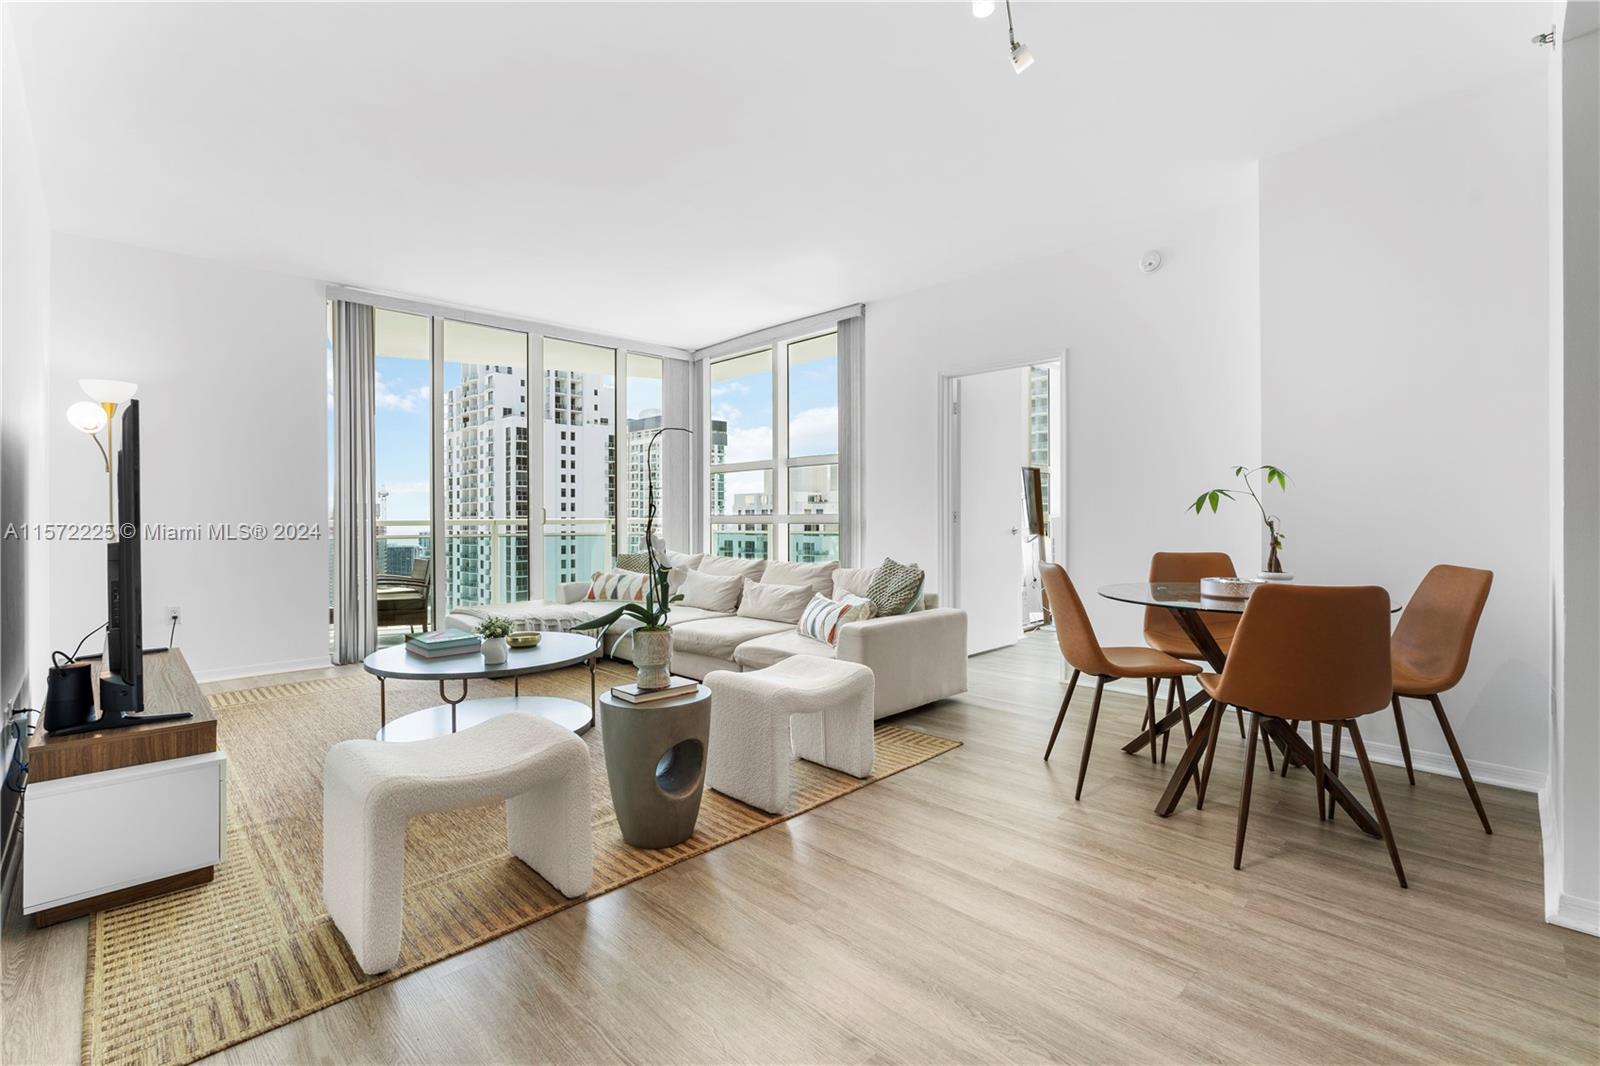 Great Corner Unit in Brickell 2 Bedrooms 2.5 Bathrooms, City Views, Granite Counter Tops in the Kitchen, Close to Brickell City Center, Full Amenities, Gym, Pools and Others